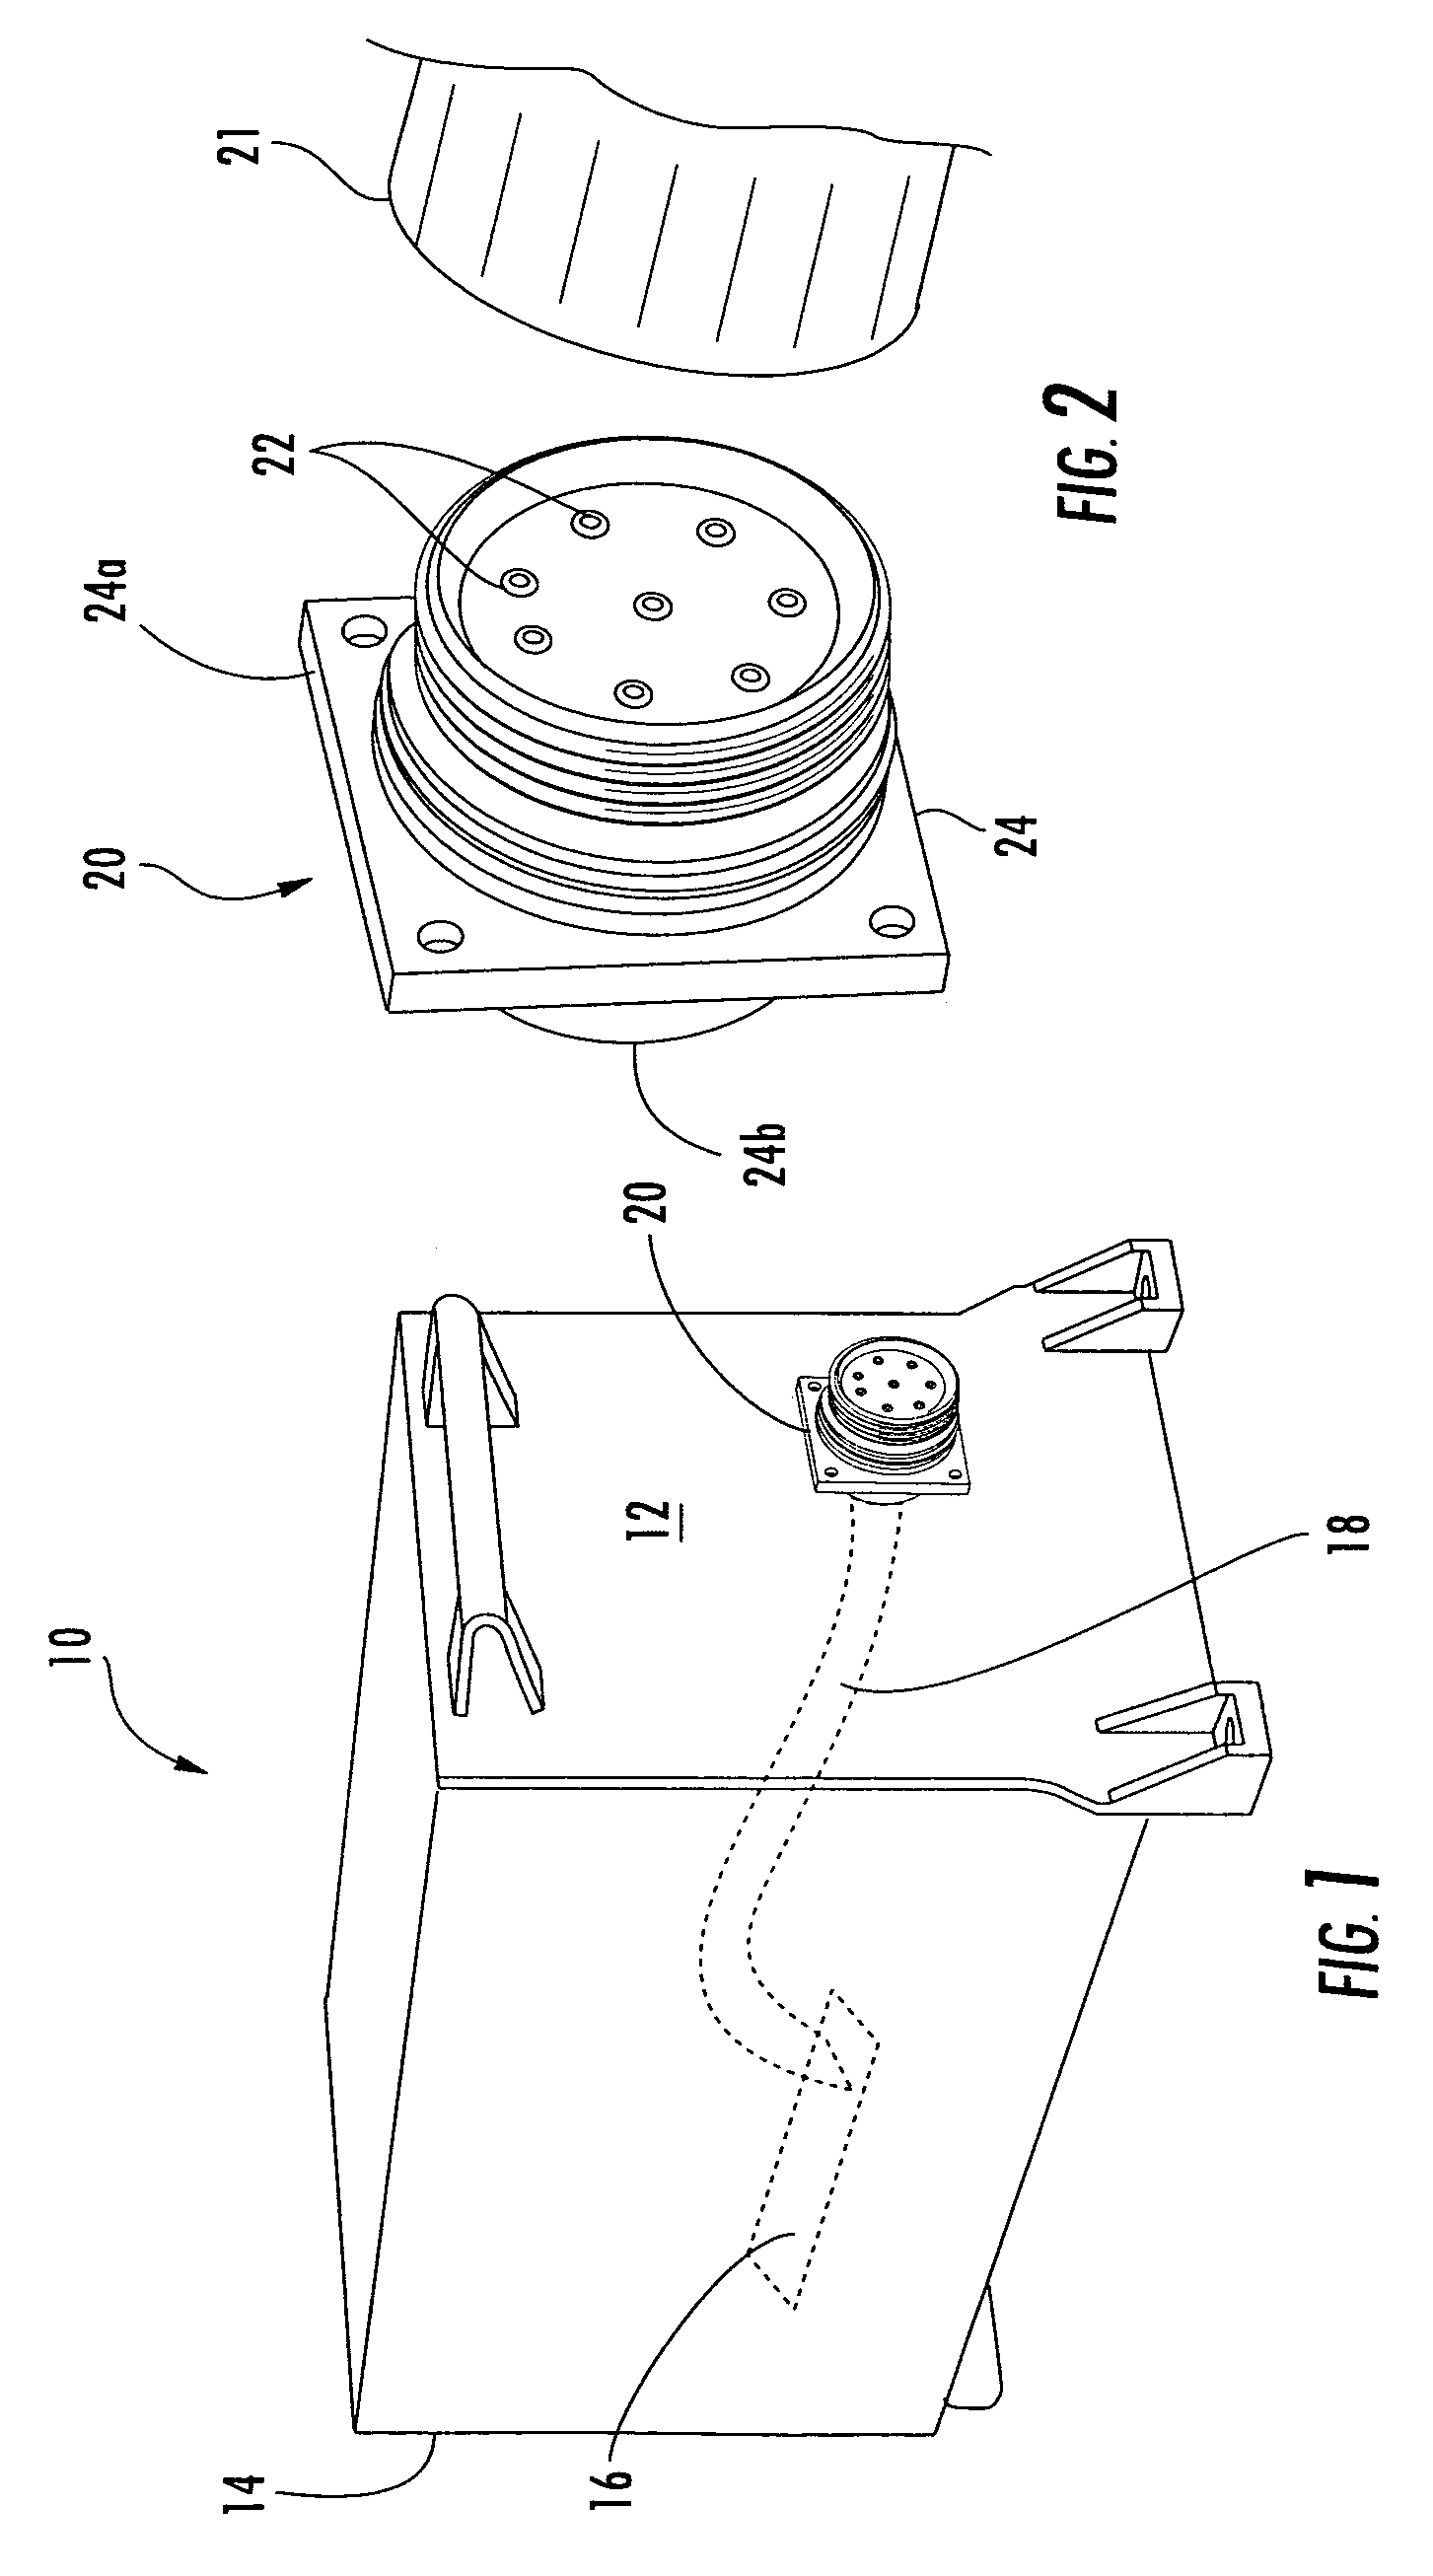 Wall mount fiber optic connector and associated method for forming the same